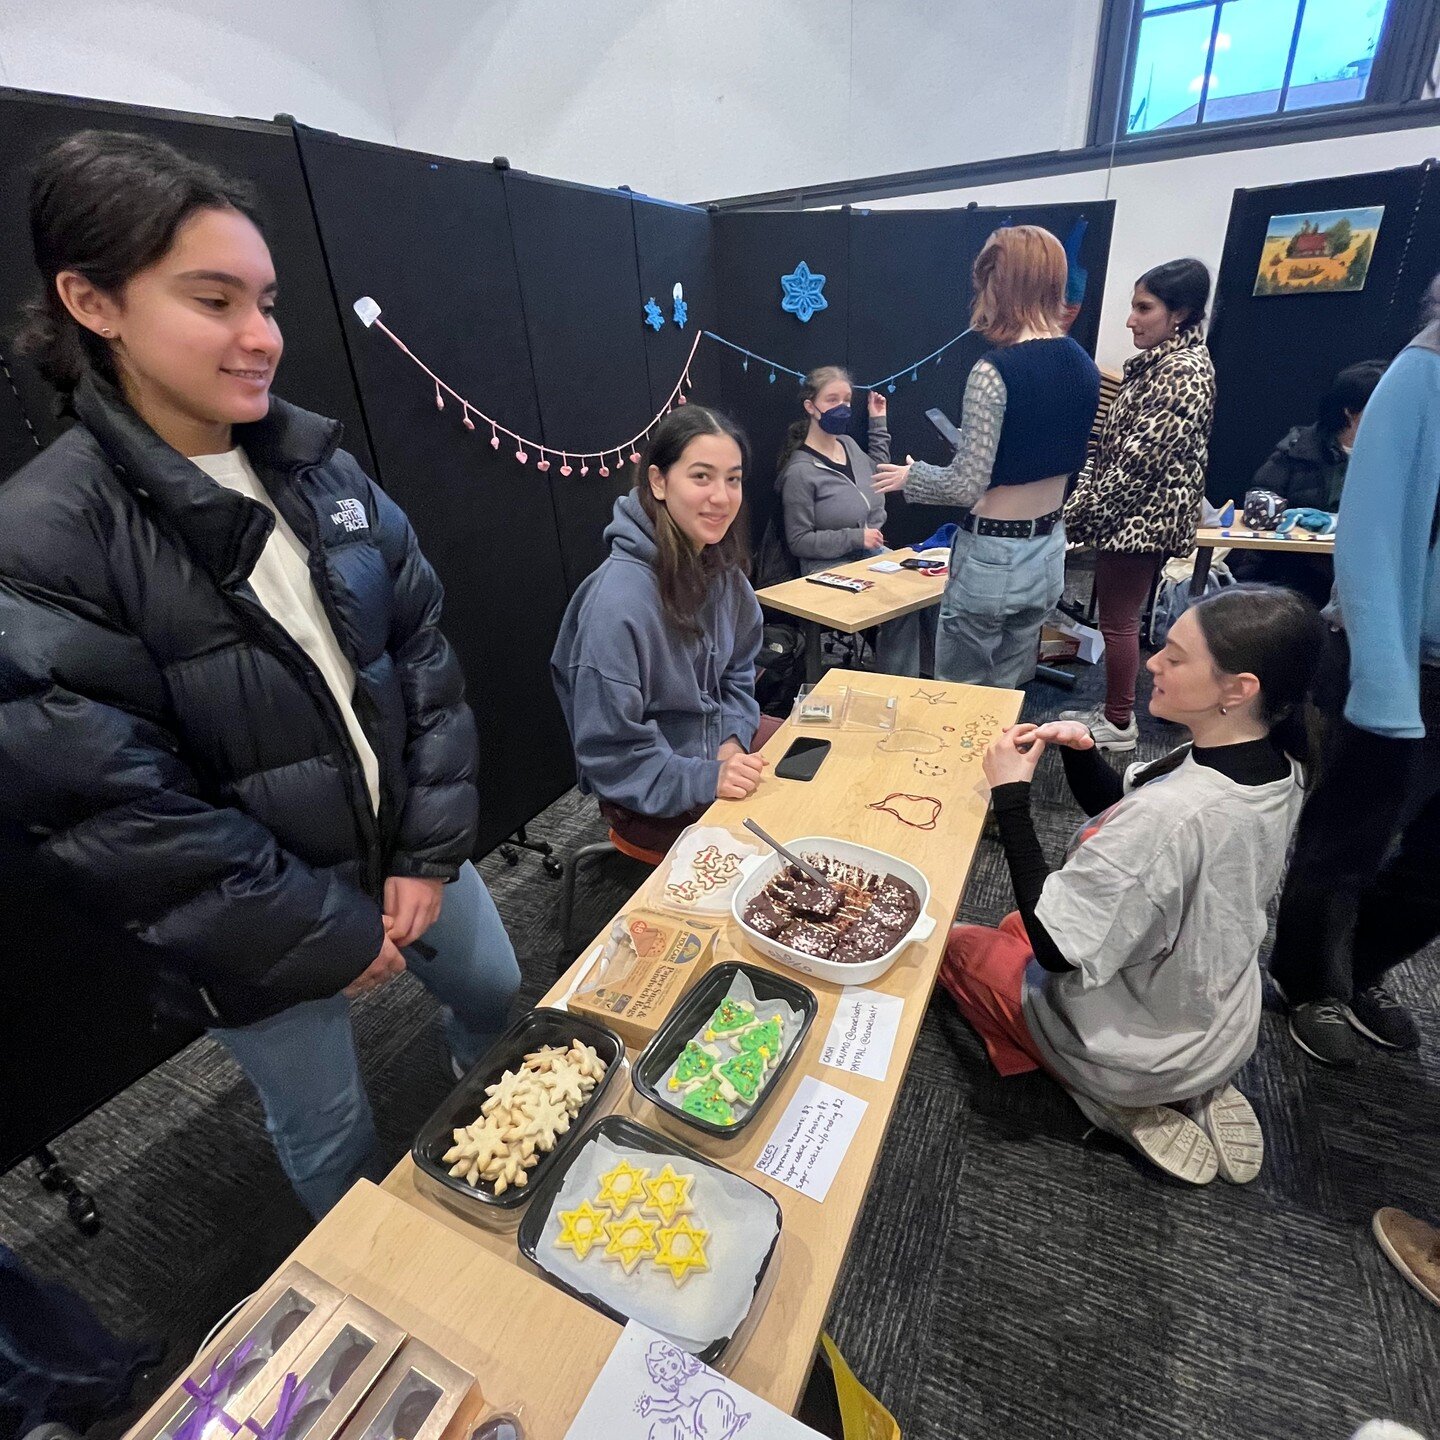 Yesterday we were excited to hold a student-run Maker Fair. This gave students the opportunity to create and market their own creative products and buy a stall, proceeds from which get returned to the Open Studio program. Our Arts Club and Open Studi